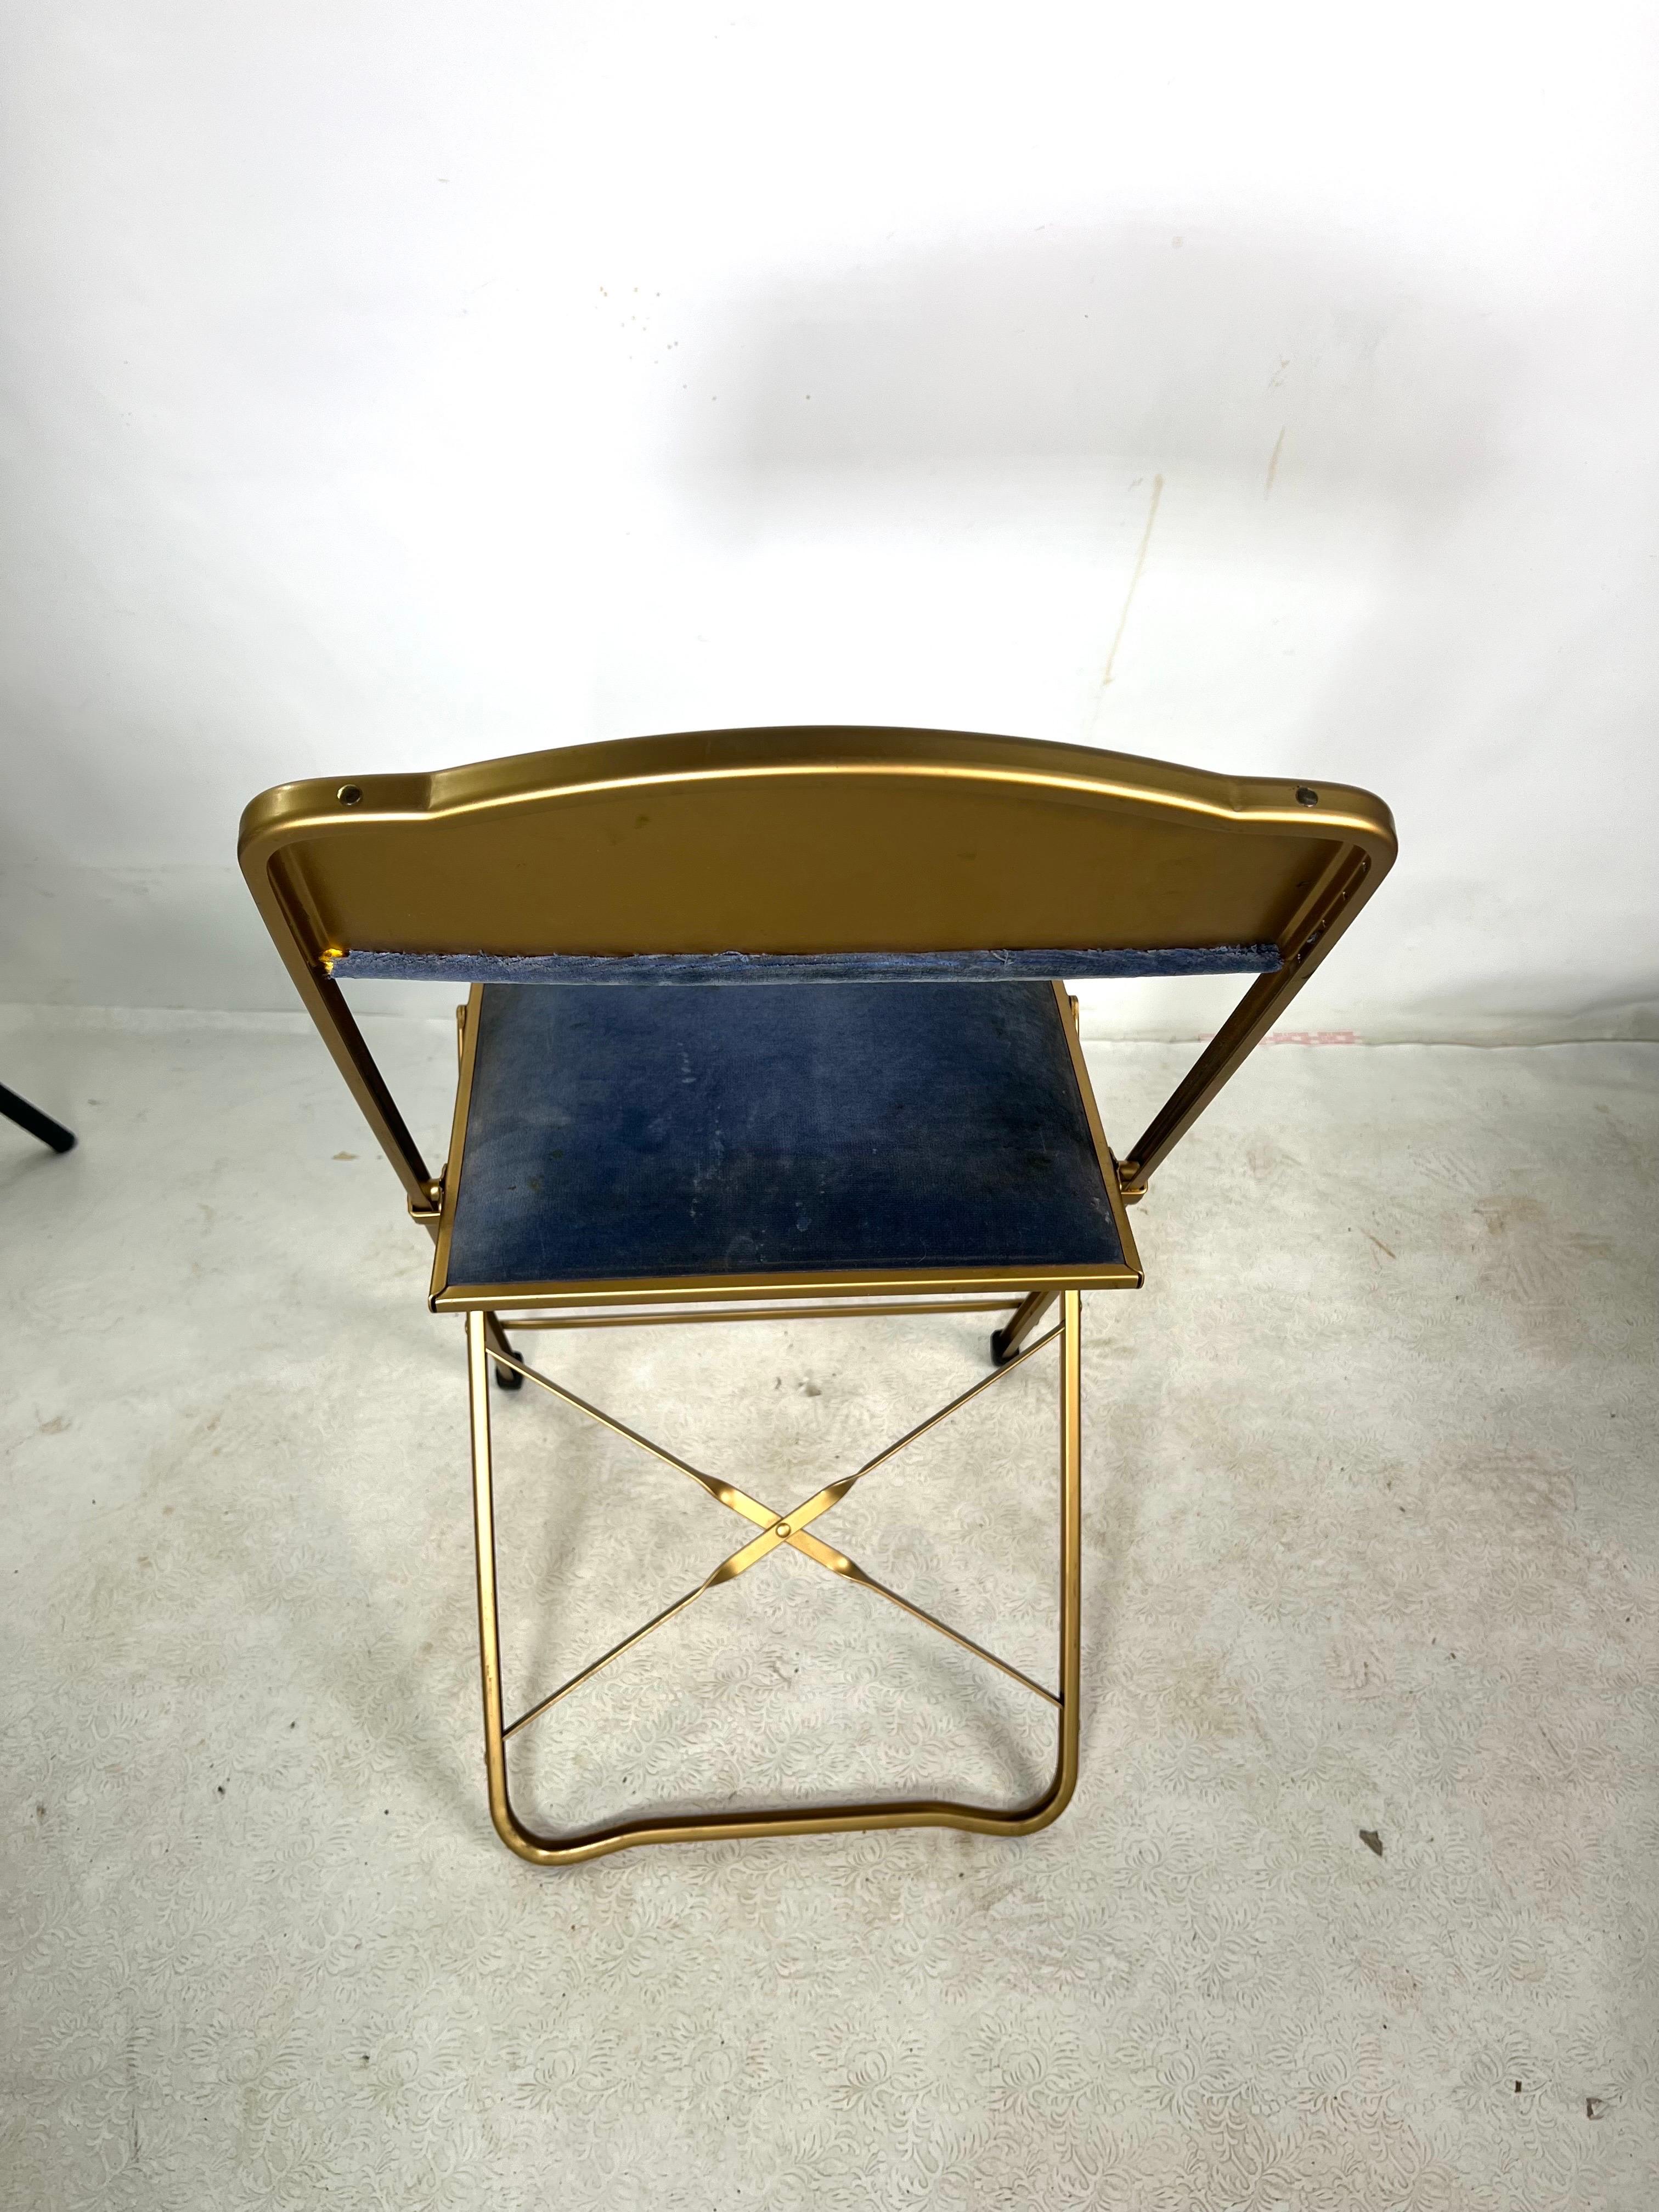 For sale is this nice vintage velvet folding chair, made by Fritz Chair & Co. We currently have 15 chairs available for purchase. Each chair is 95.00.